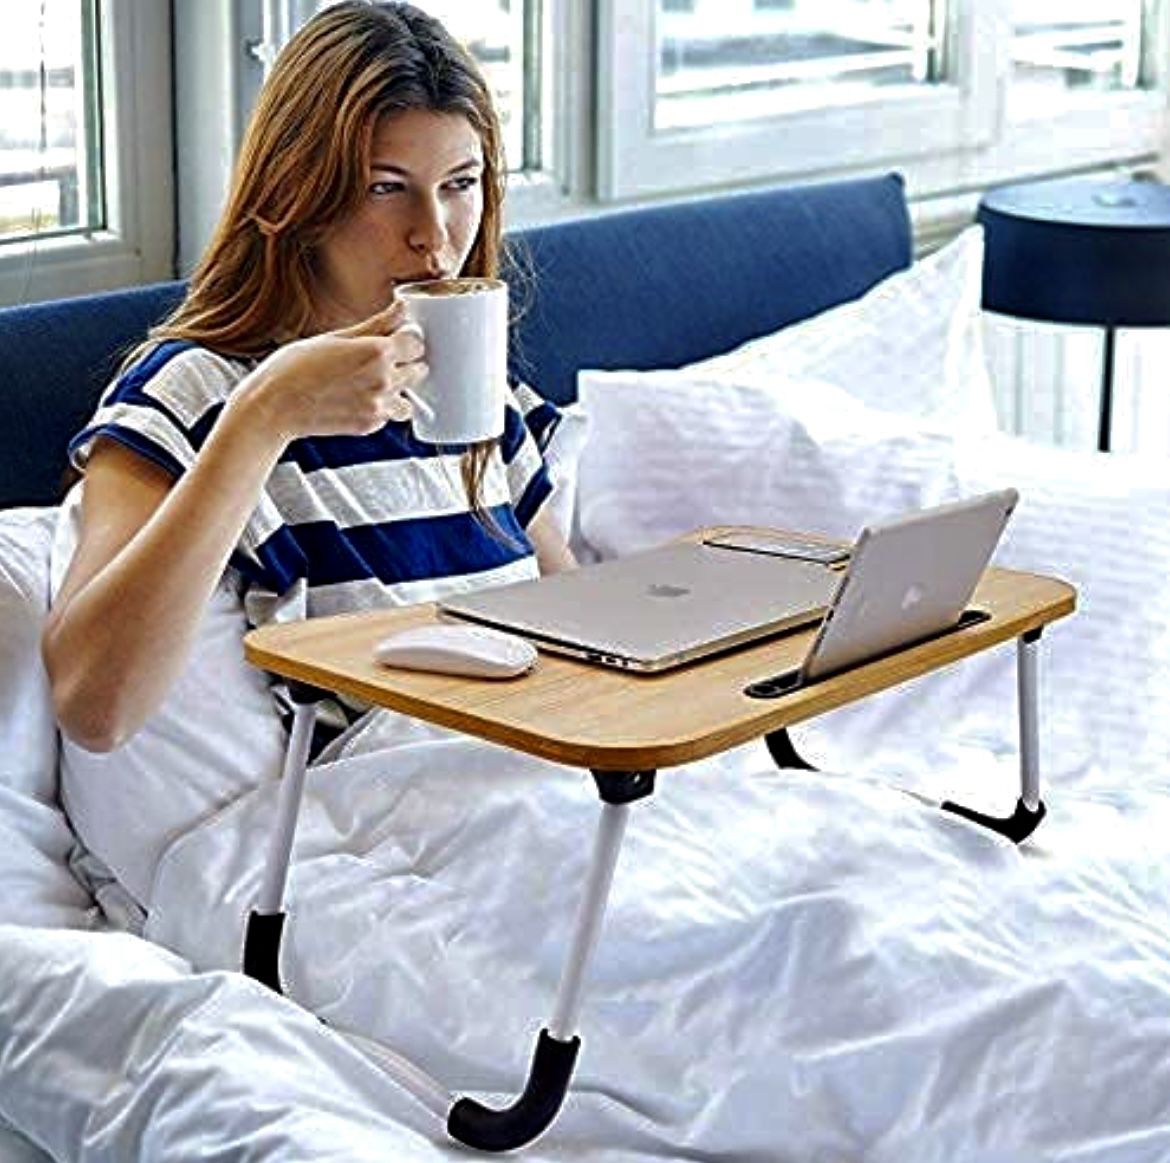 *NEW* Oak Laptop Desk, Wheanen Portable Laptop Bed Tray Table Notebook Stand Reading Holder with Foldable Legs & Cup Slot for Eating Breakfast, Readin